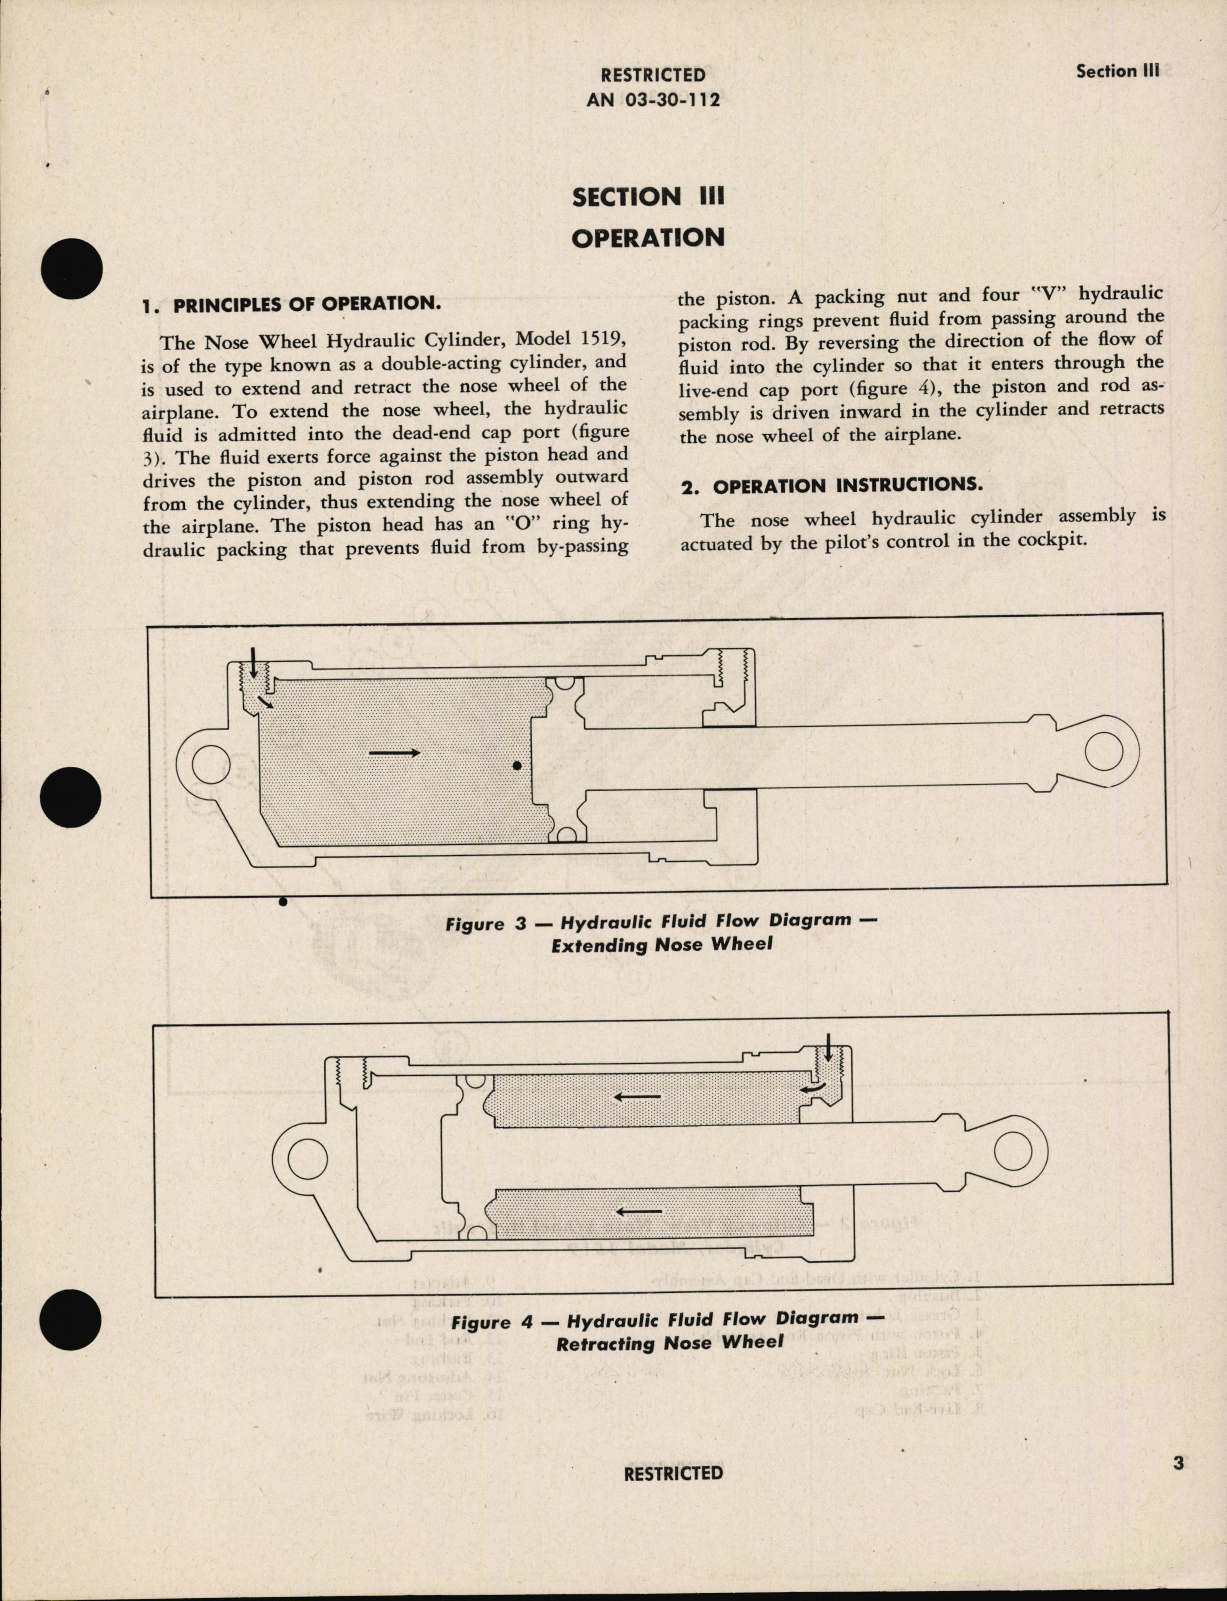 Sample page 7 from AirCorps Library document: Handbook of Instructions with Parts Catalog for Nose Wheel Hydraulic Actuating Cylinder